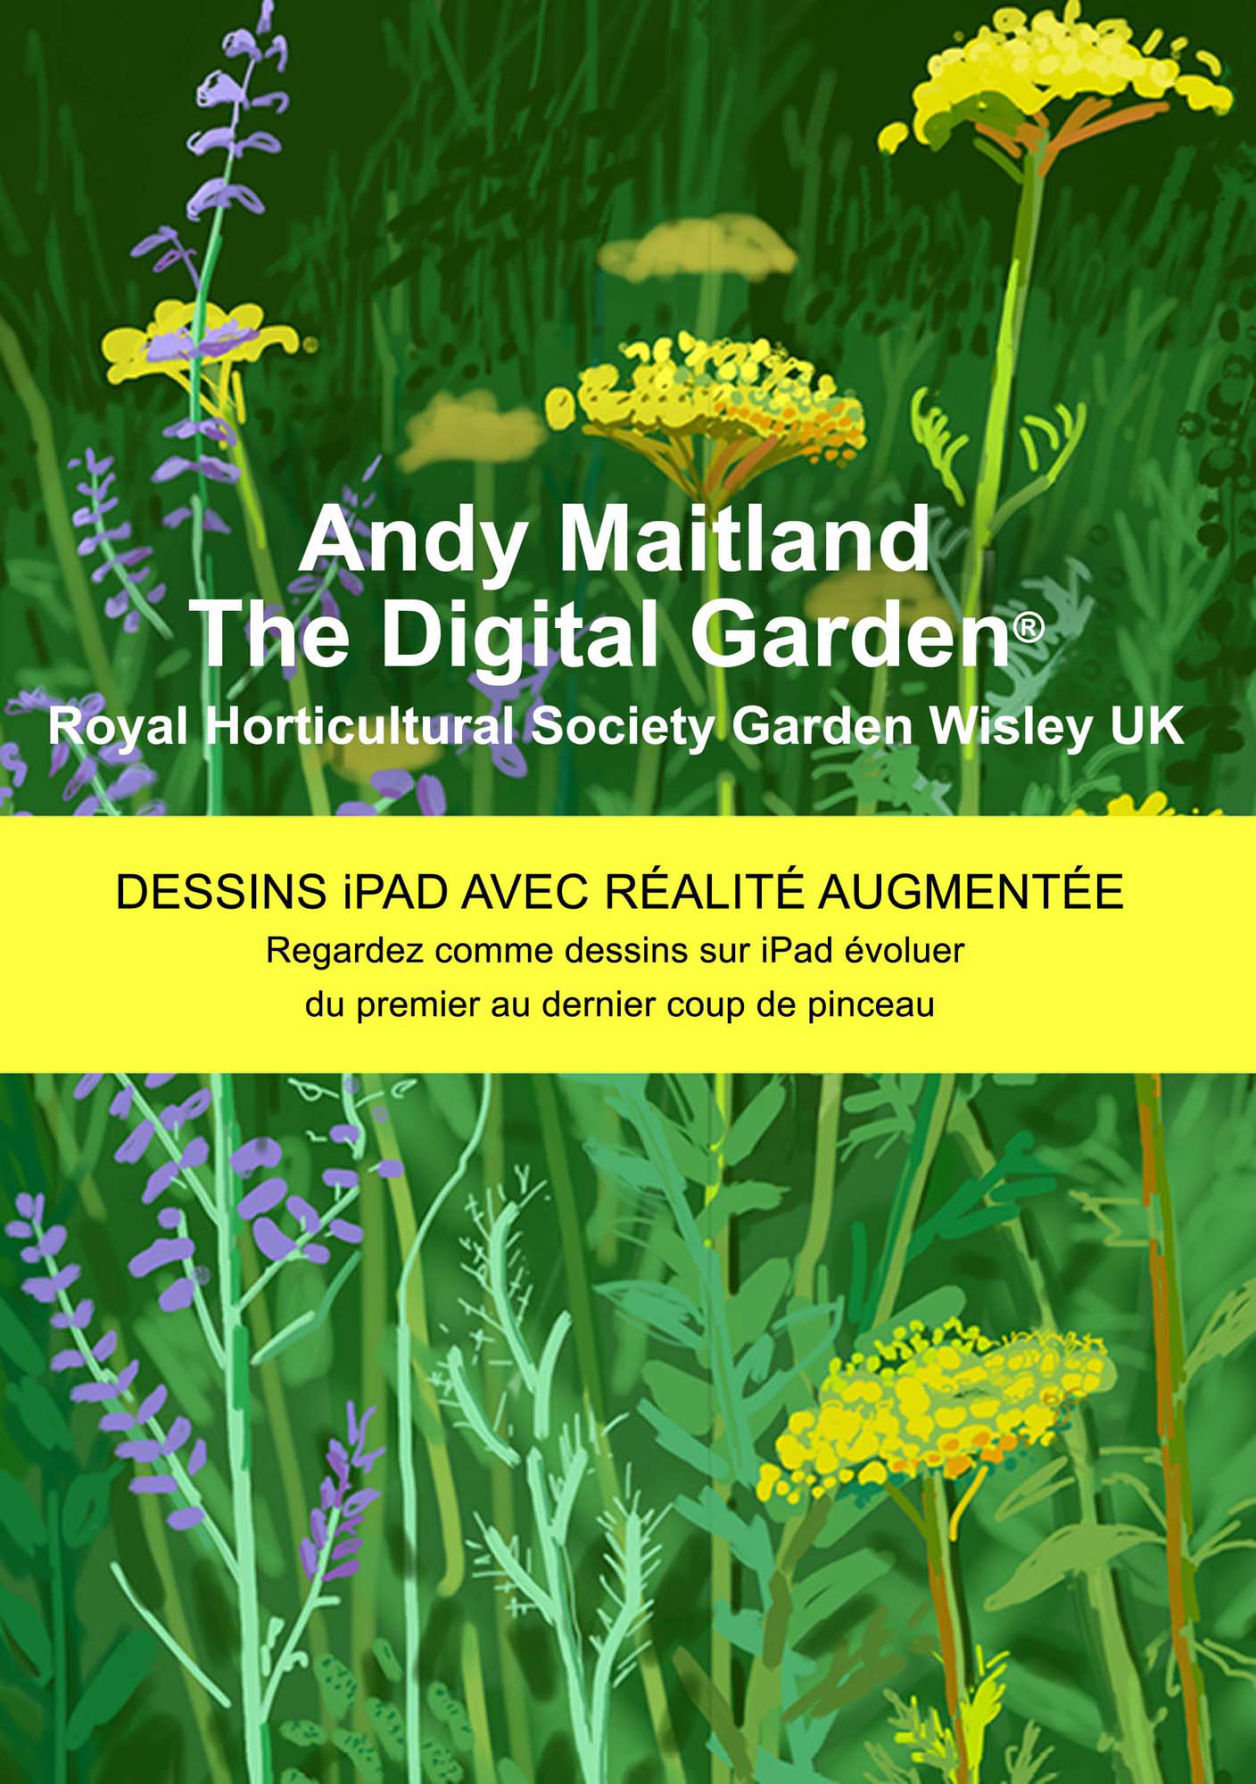 French translation - A new instant view online digital edition of ‘The Digital Garden® 2018, iPad drawings with Augmented Reality (AR) at the Royal Horticultural Society Garden Wisley’.